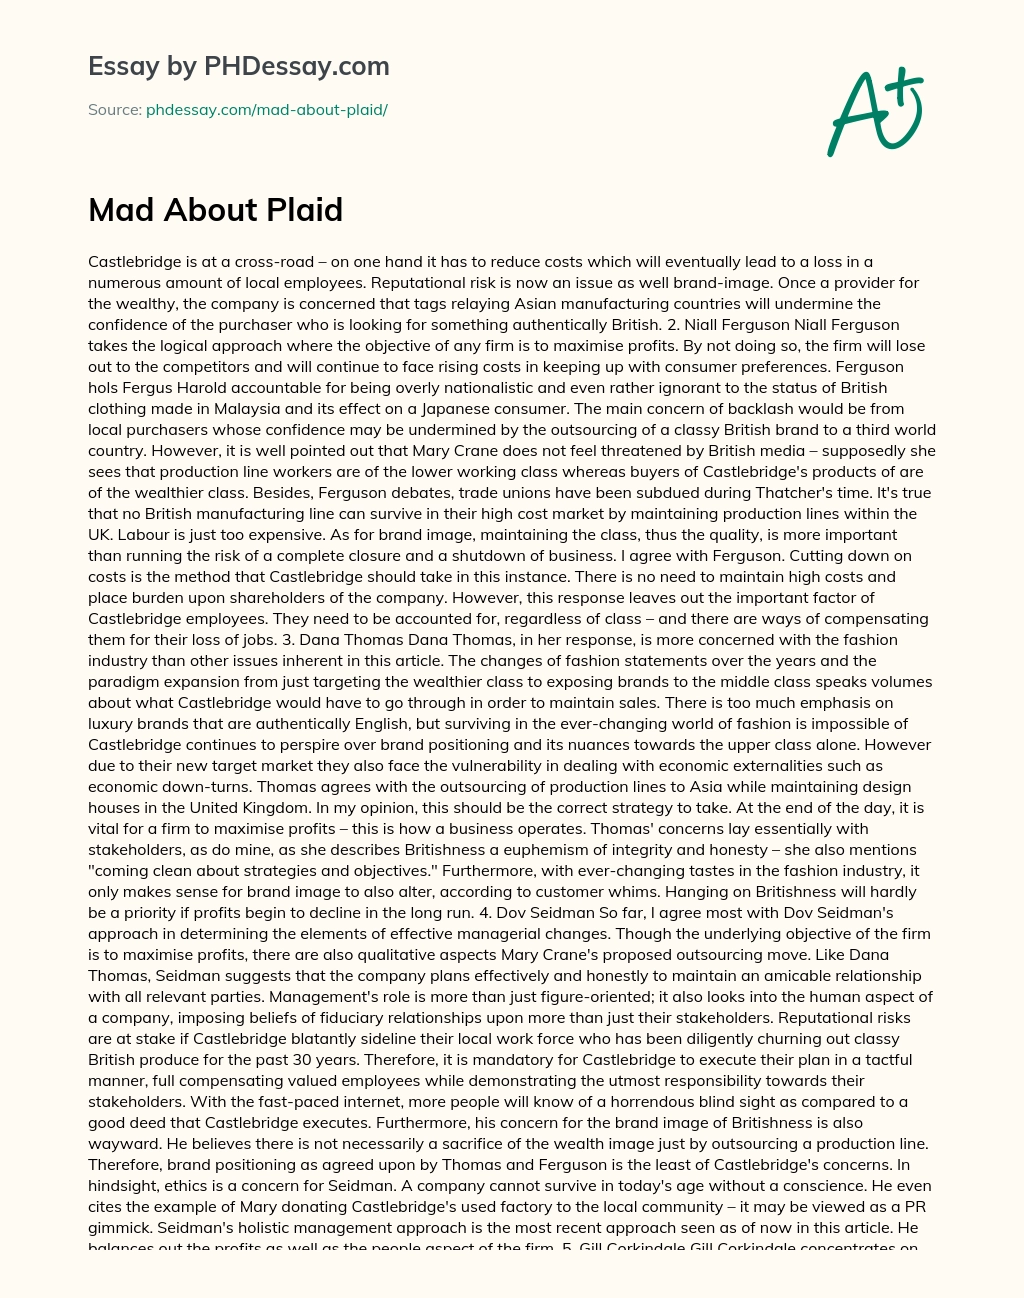 Mad About Plaid essay